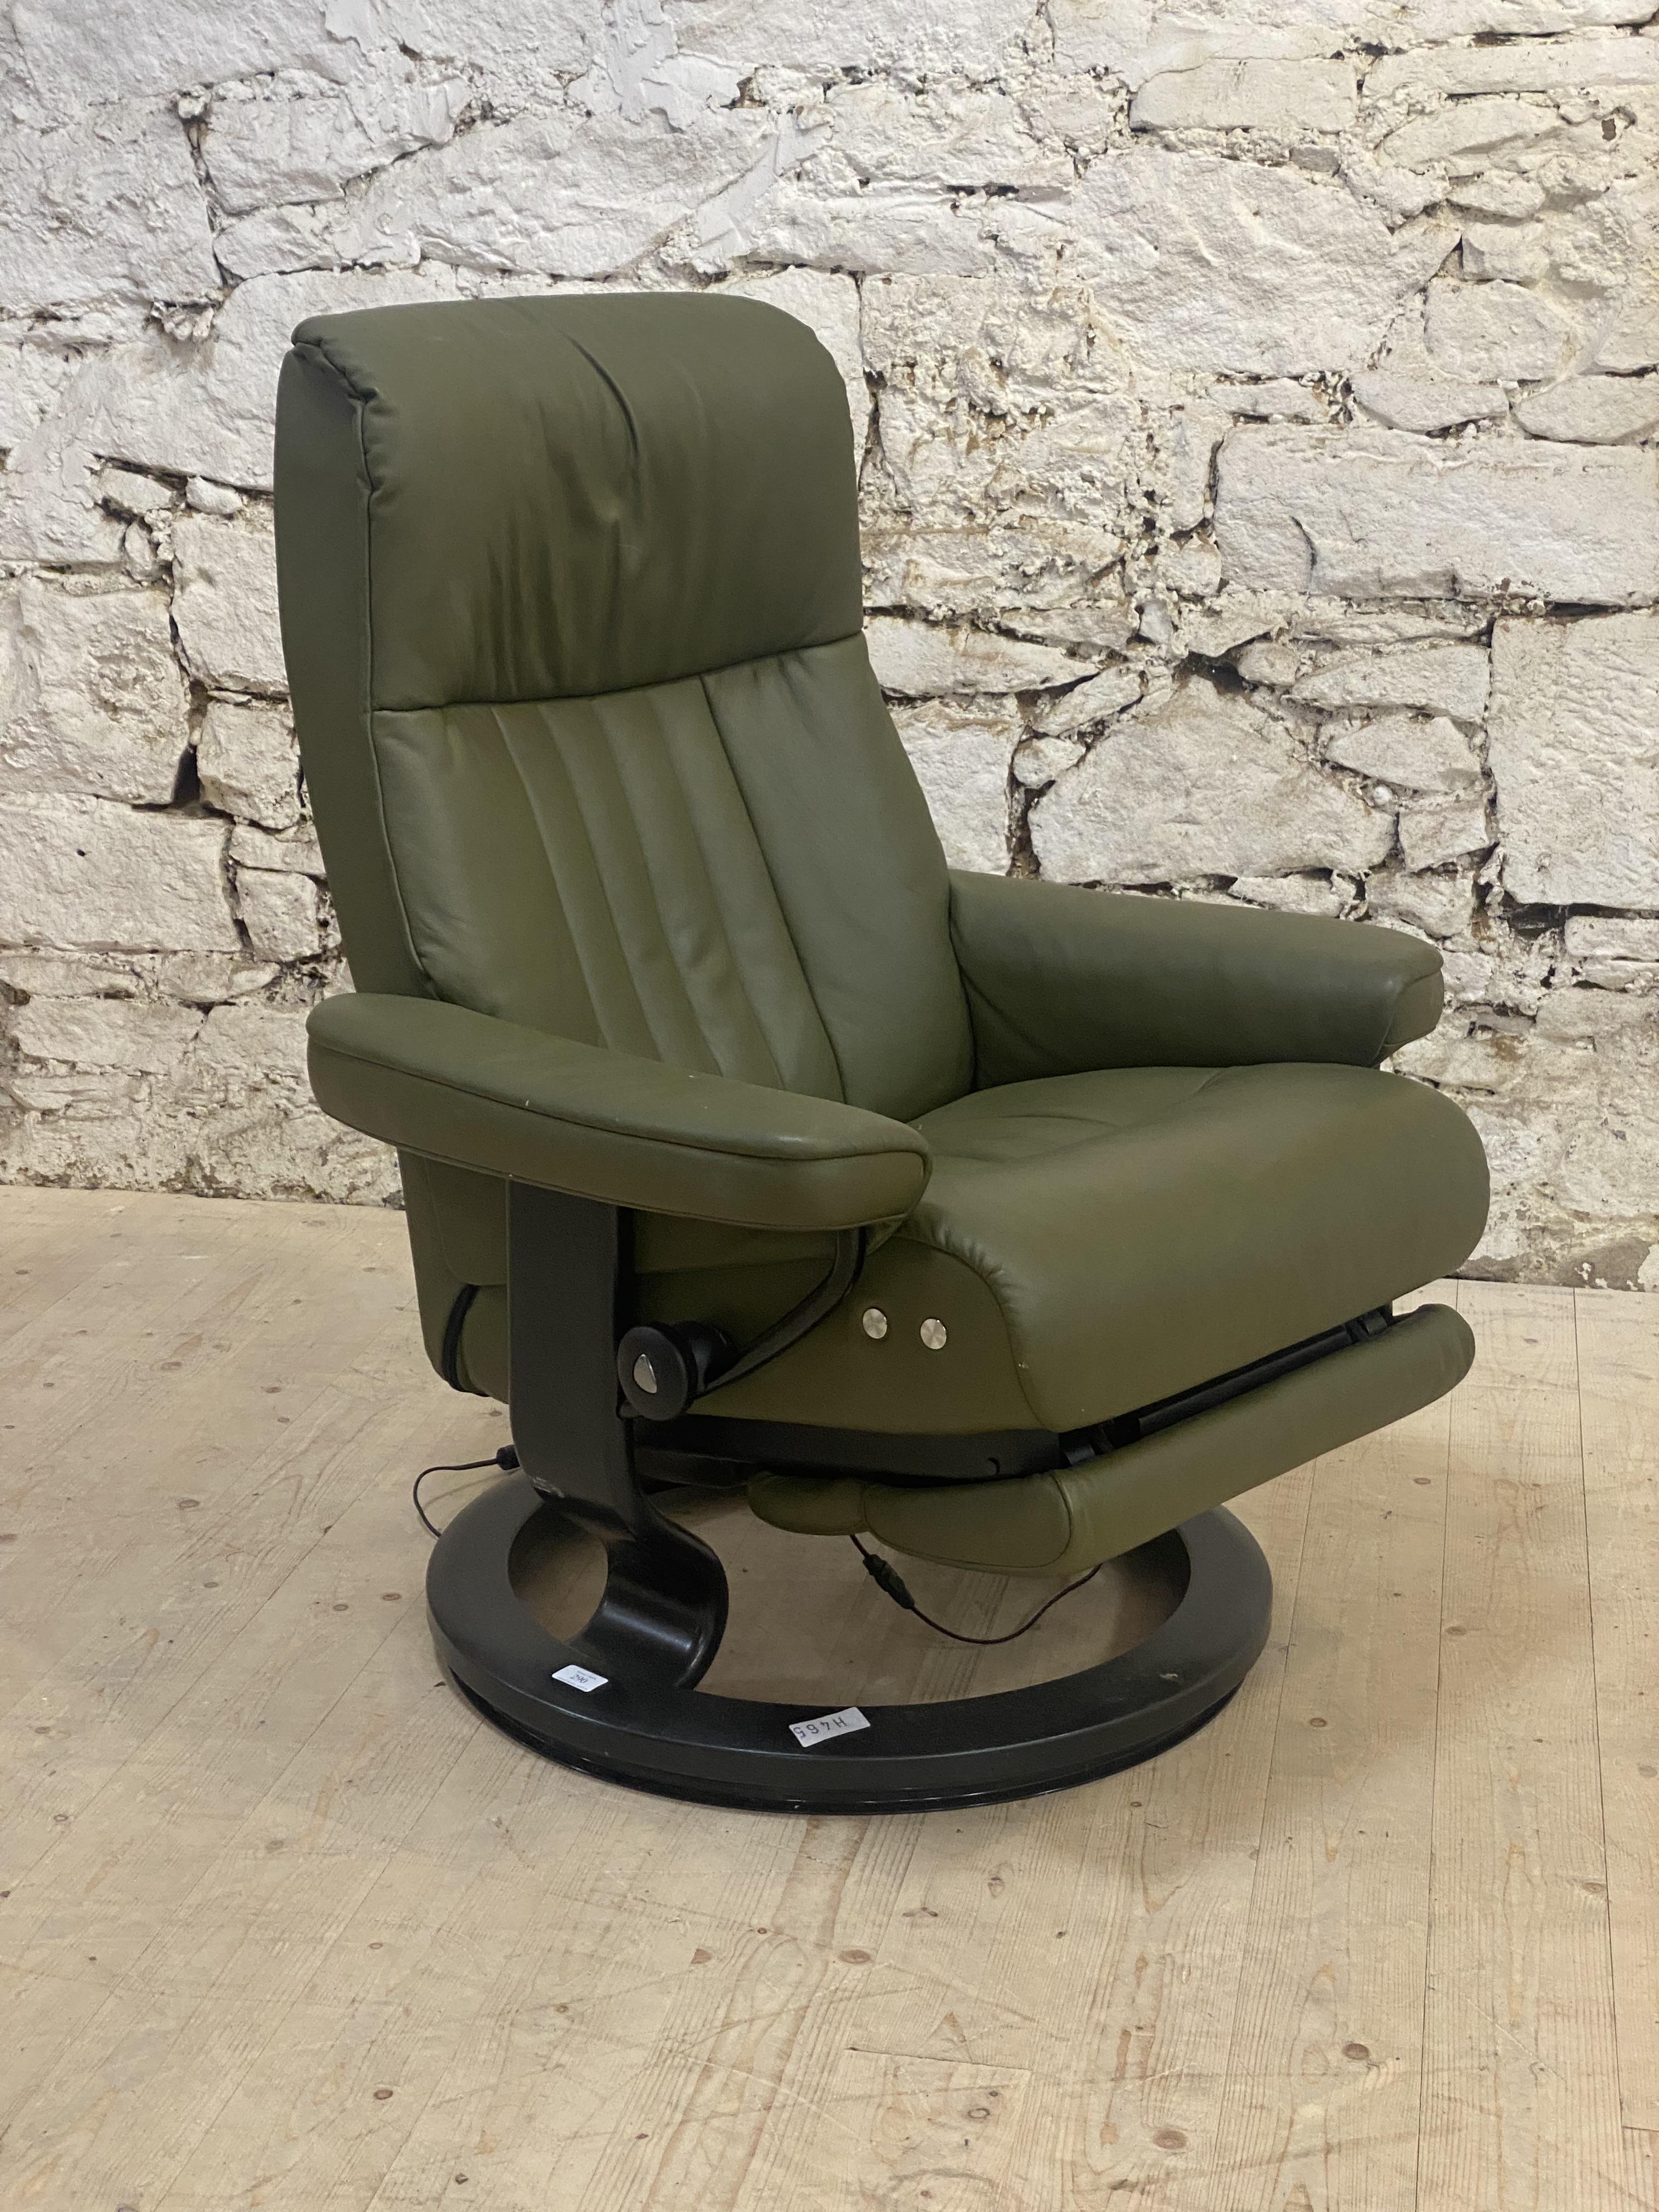 A Vintage Ekornes Stressless electric reclining lounge chair, upholstered in green leather and